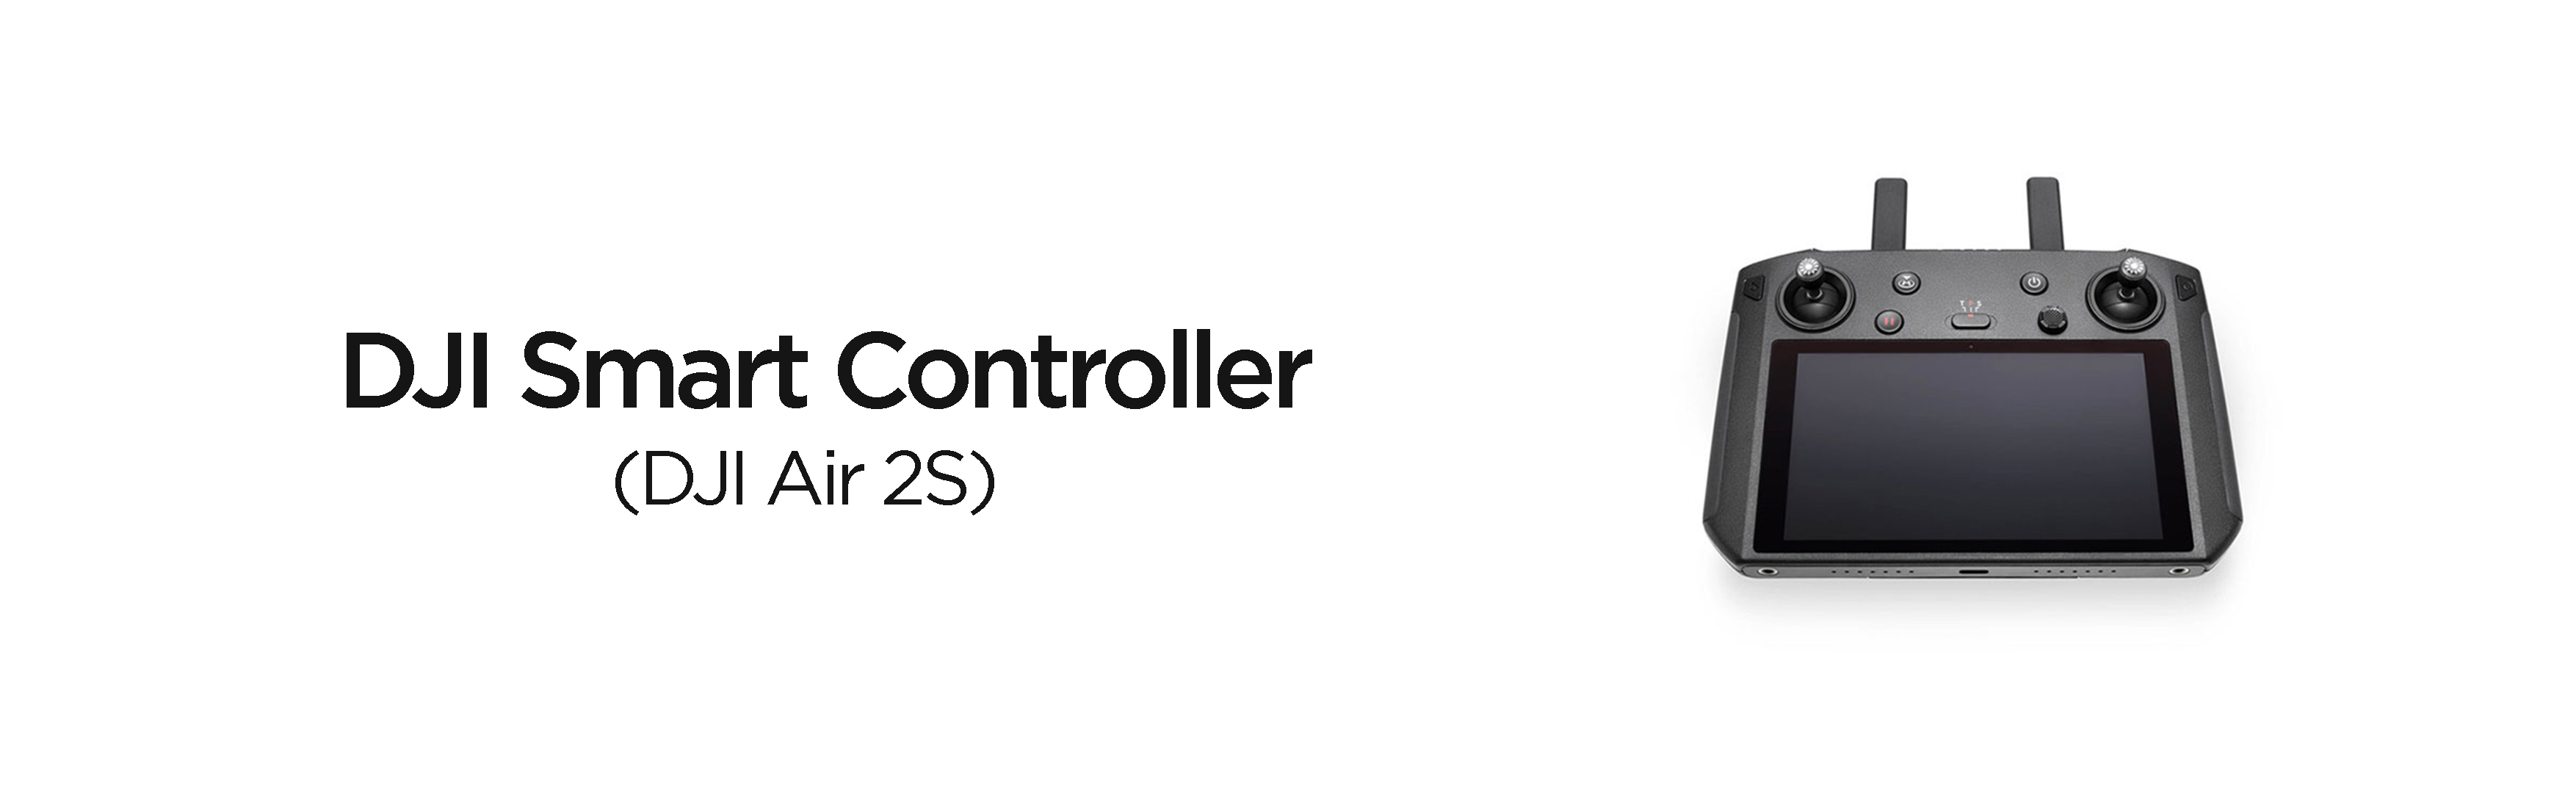 DJI Smart Controller Must Have Accessories